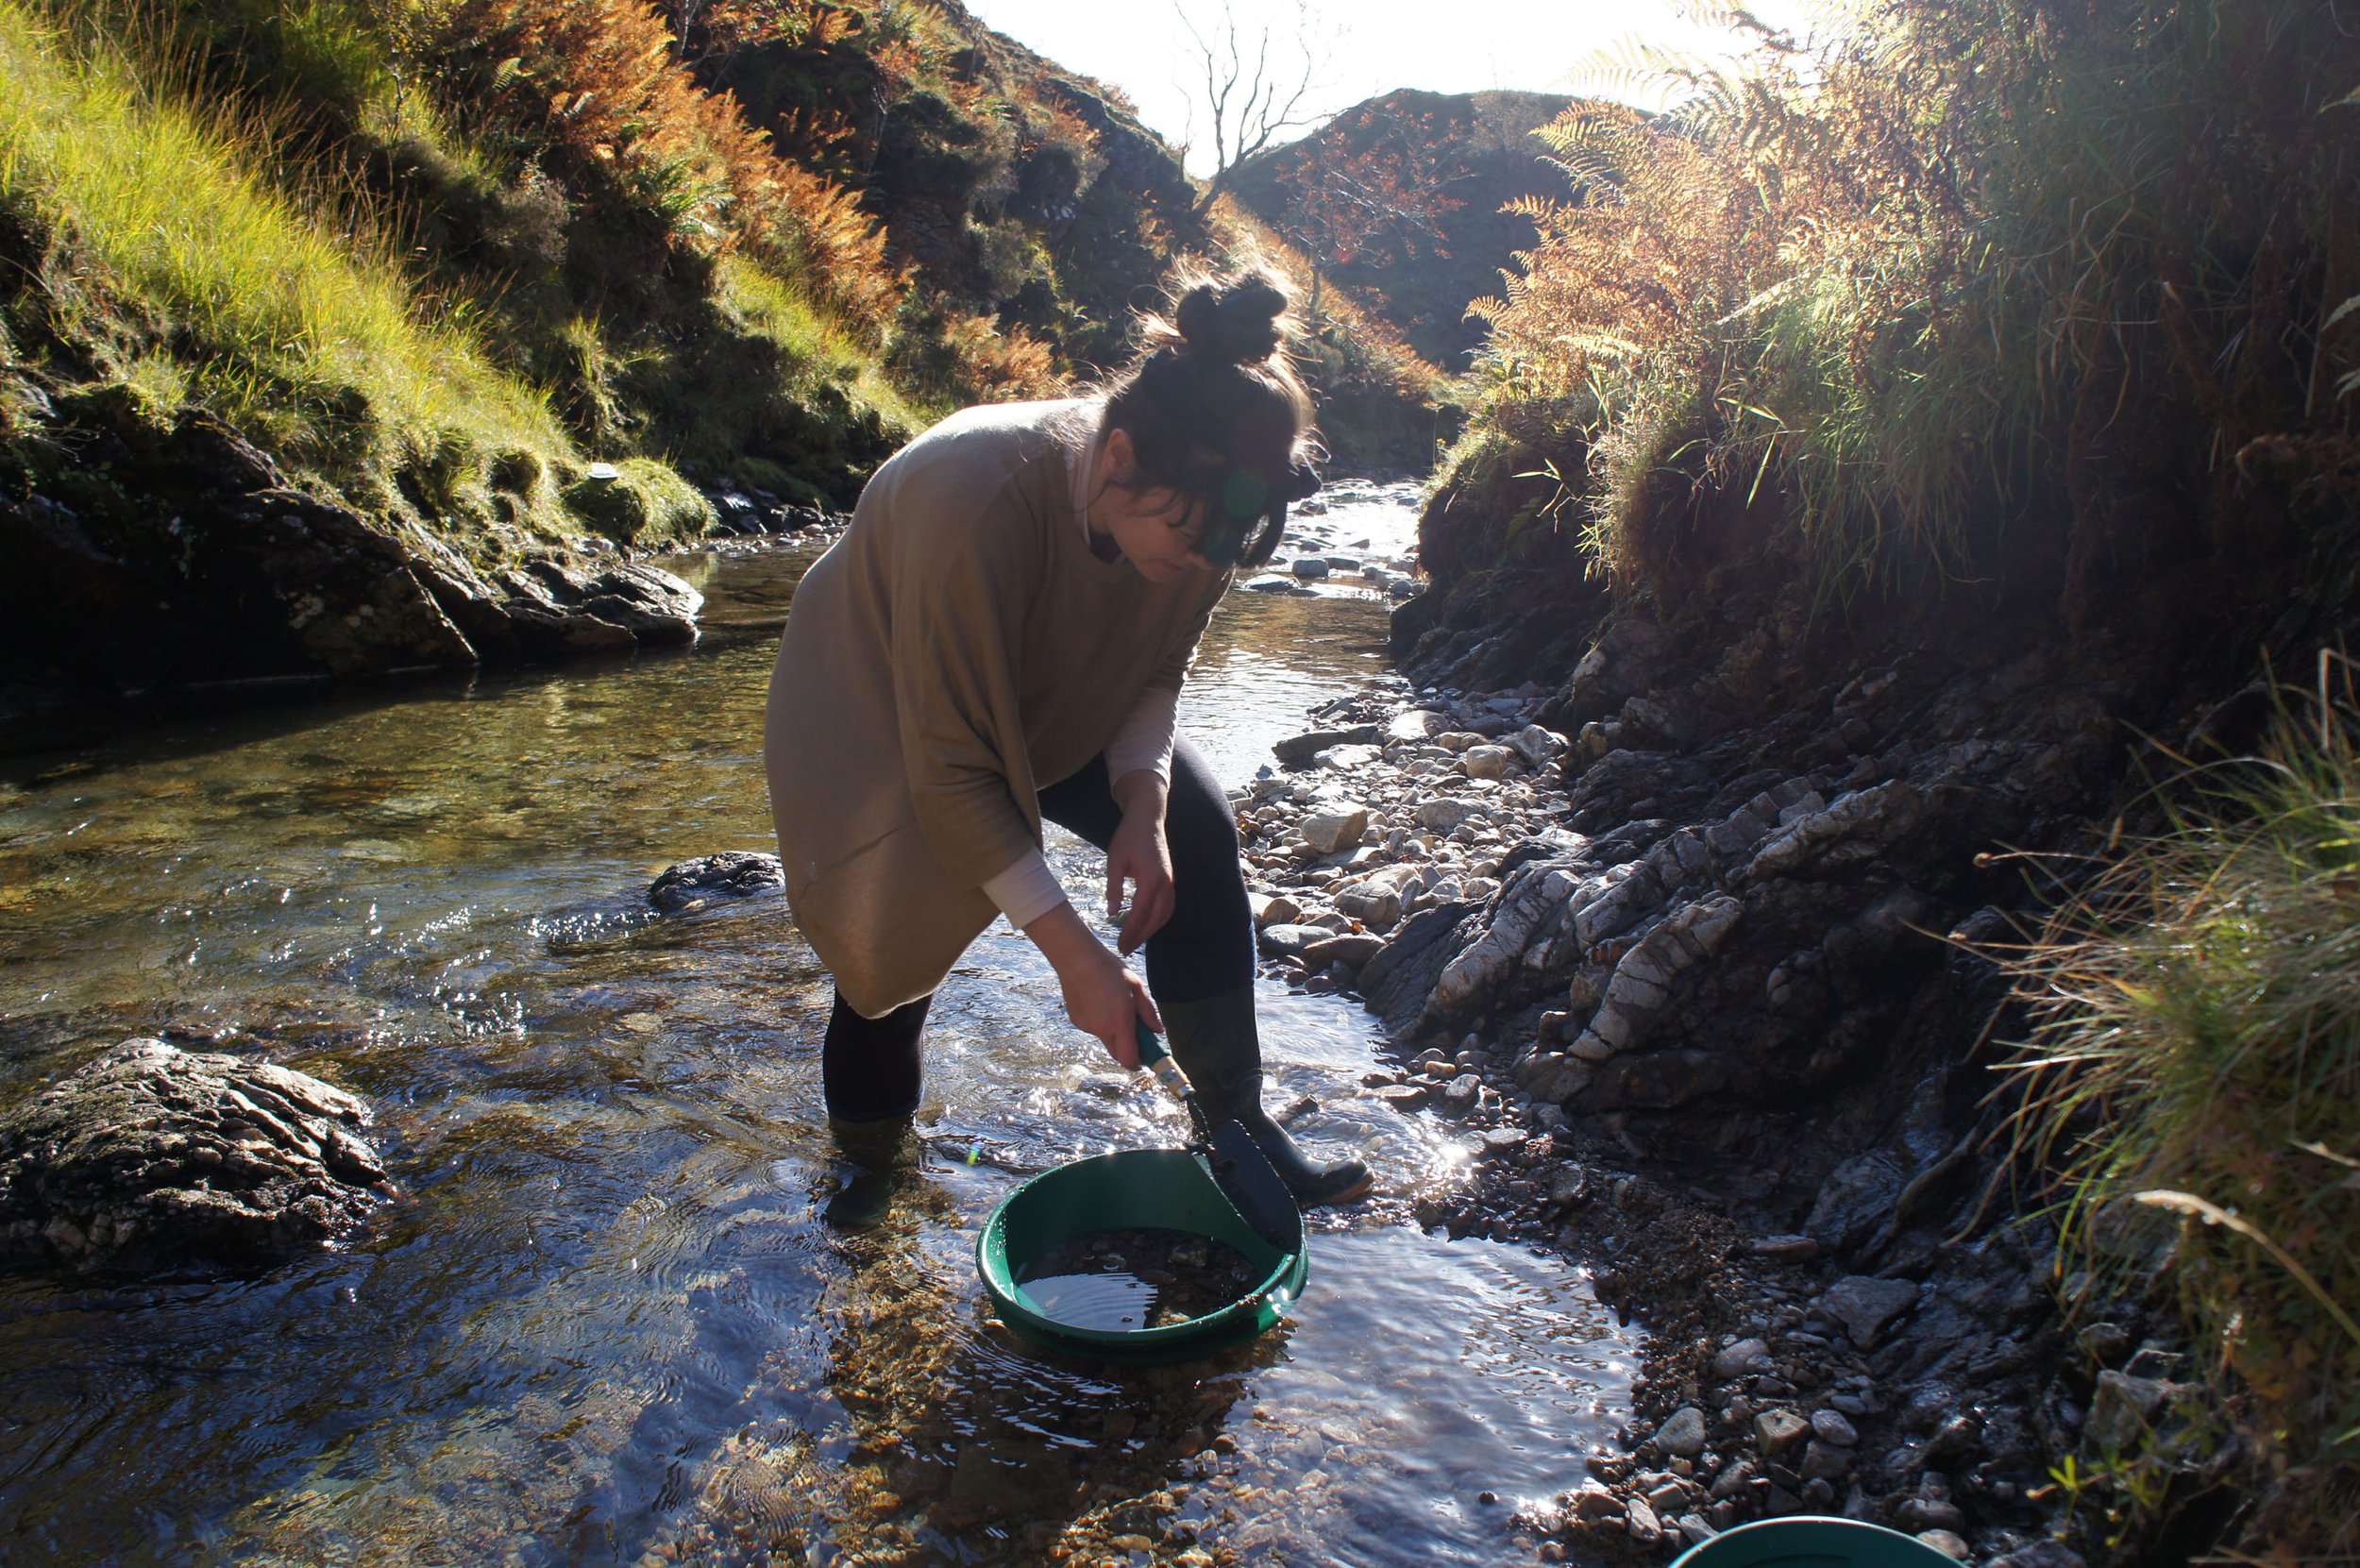 Stefanie Ying Lin Cheong panning for gold in Scottish river. Image credit: Beth Allen